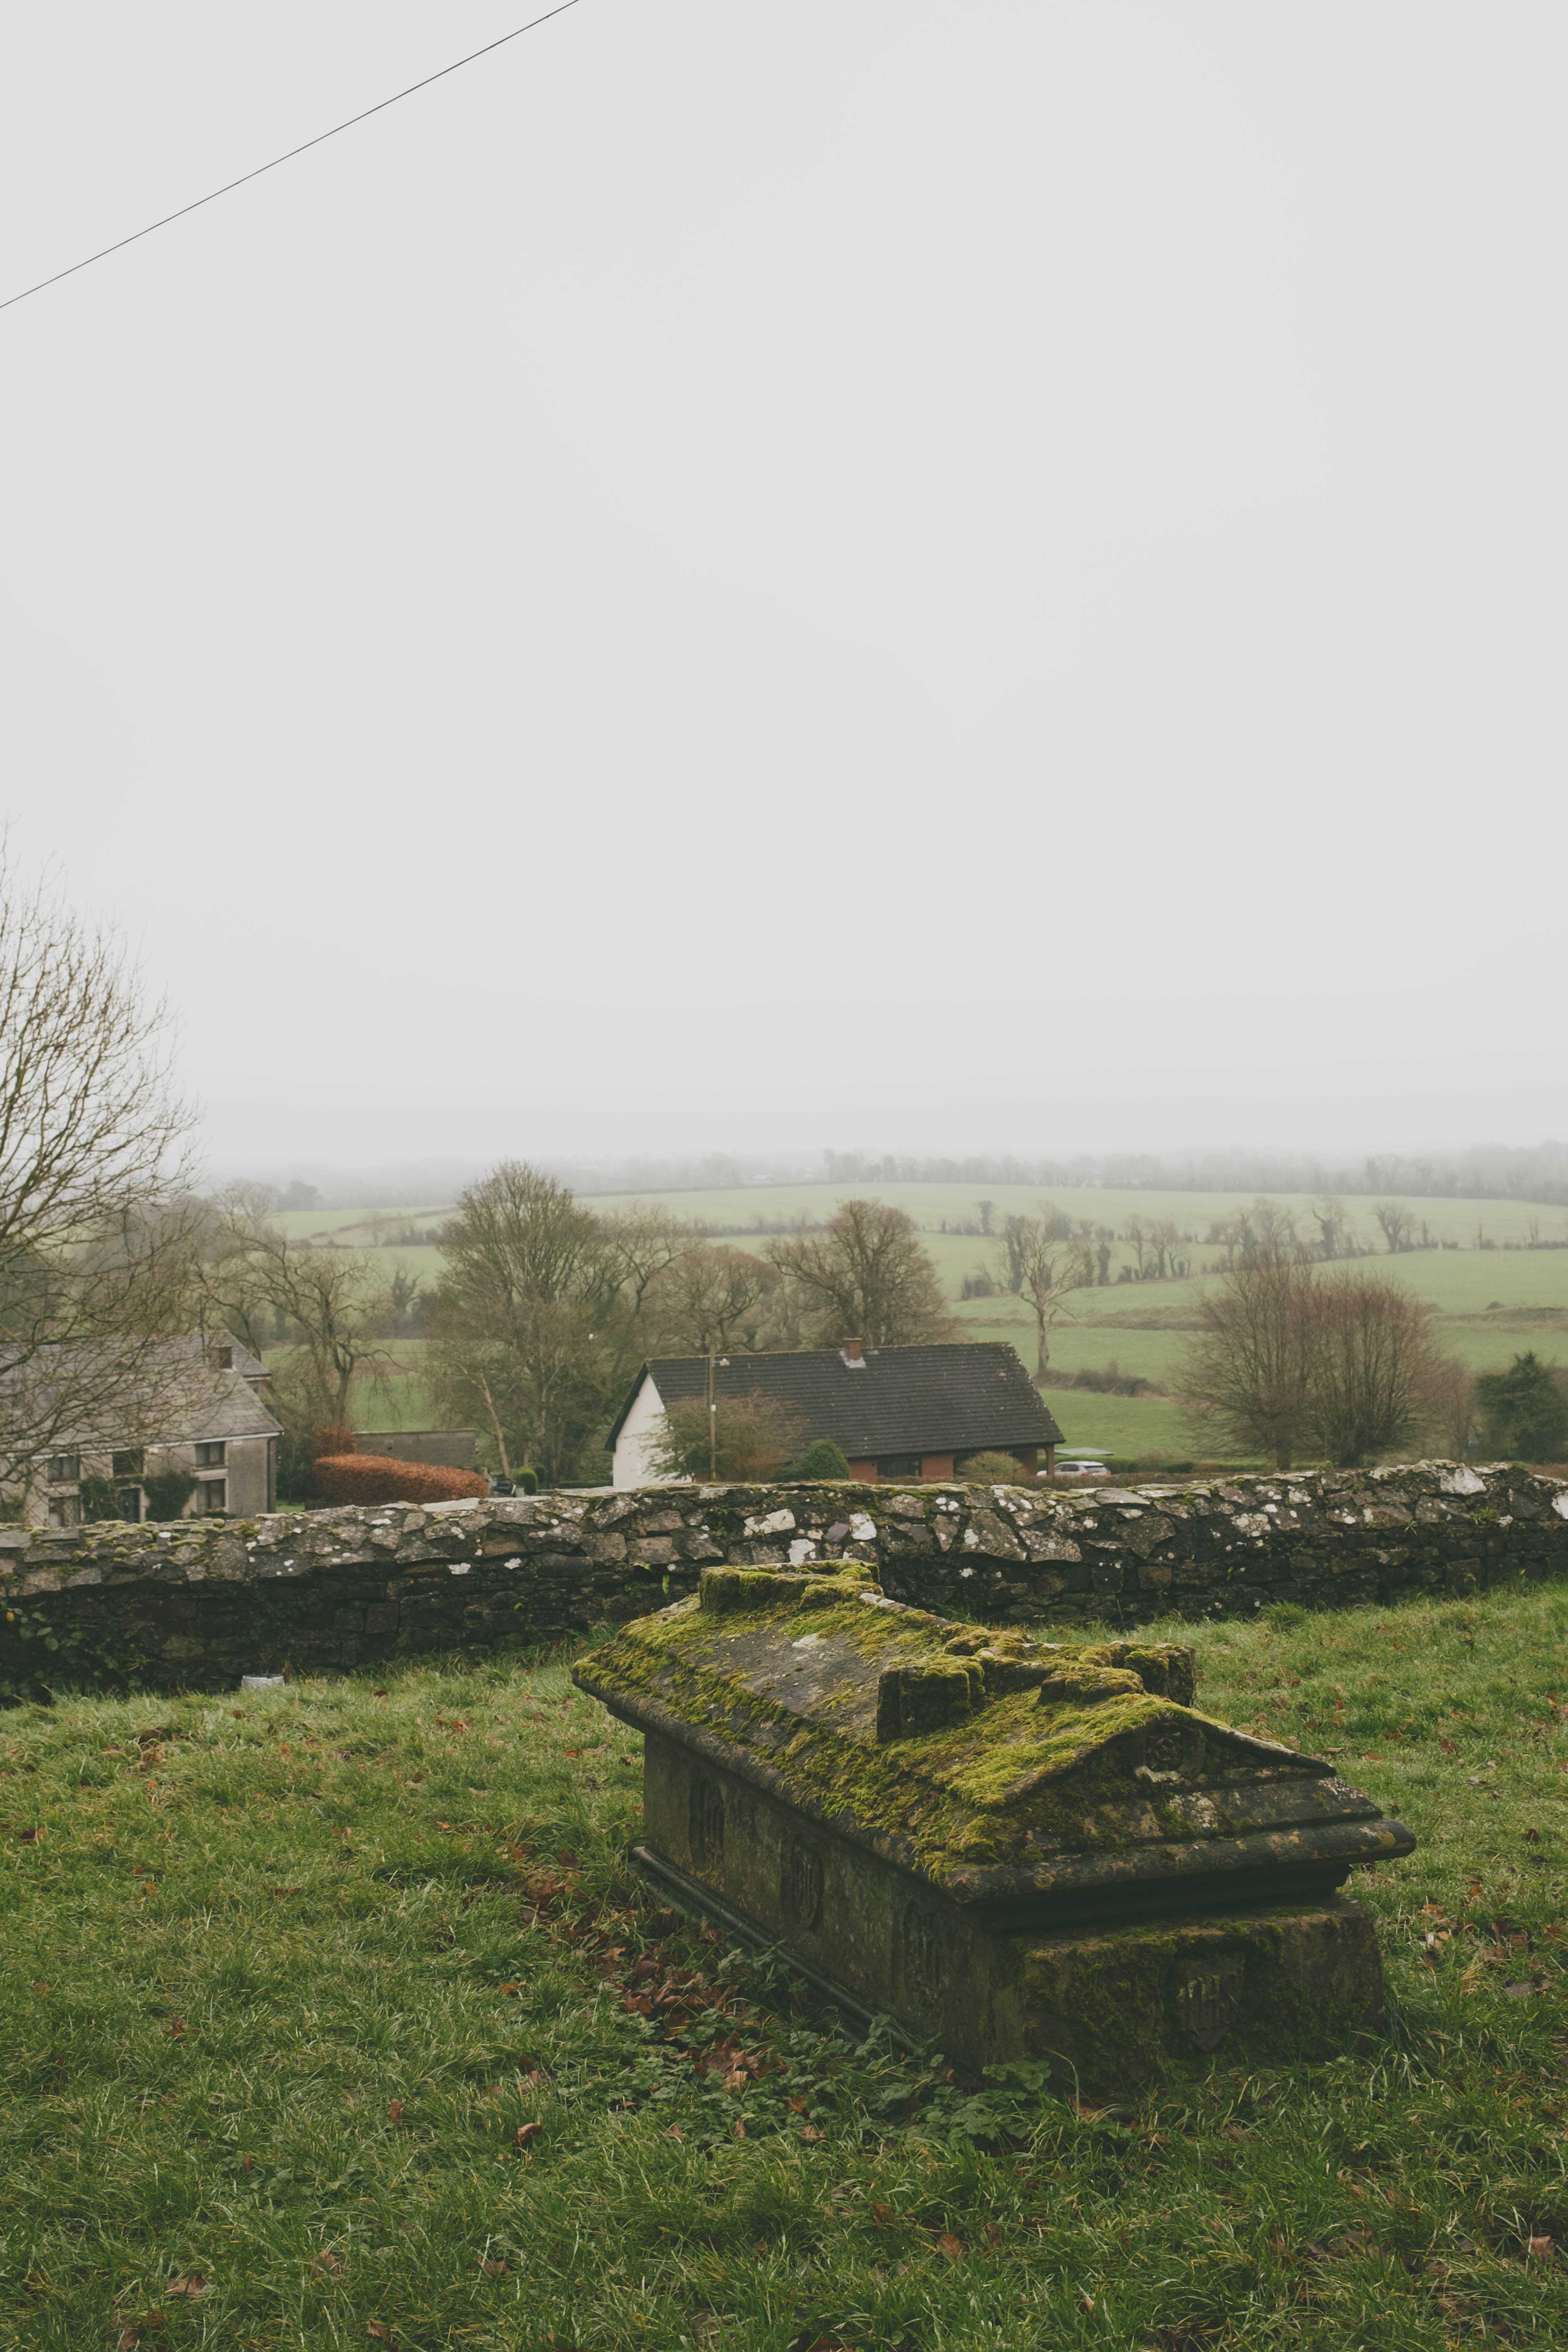 Tomb overlooking a field on a foggy day